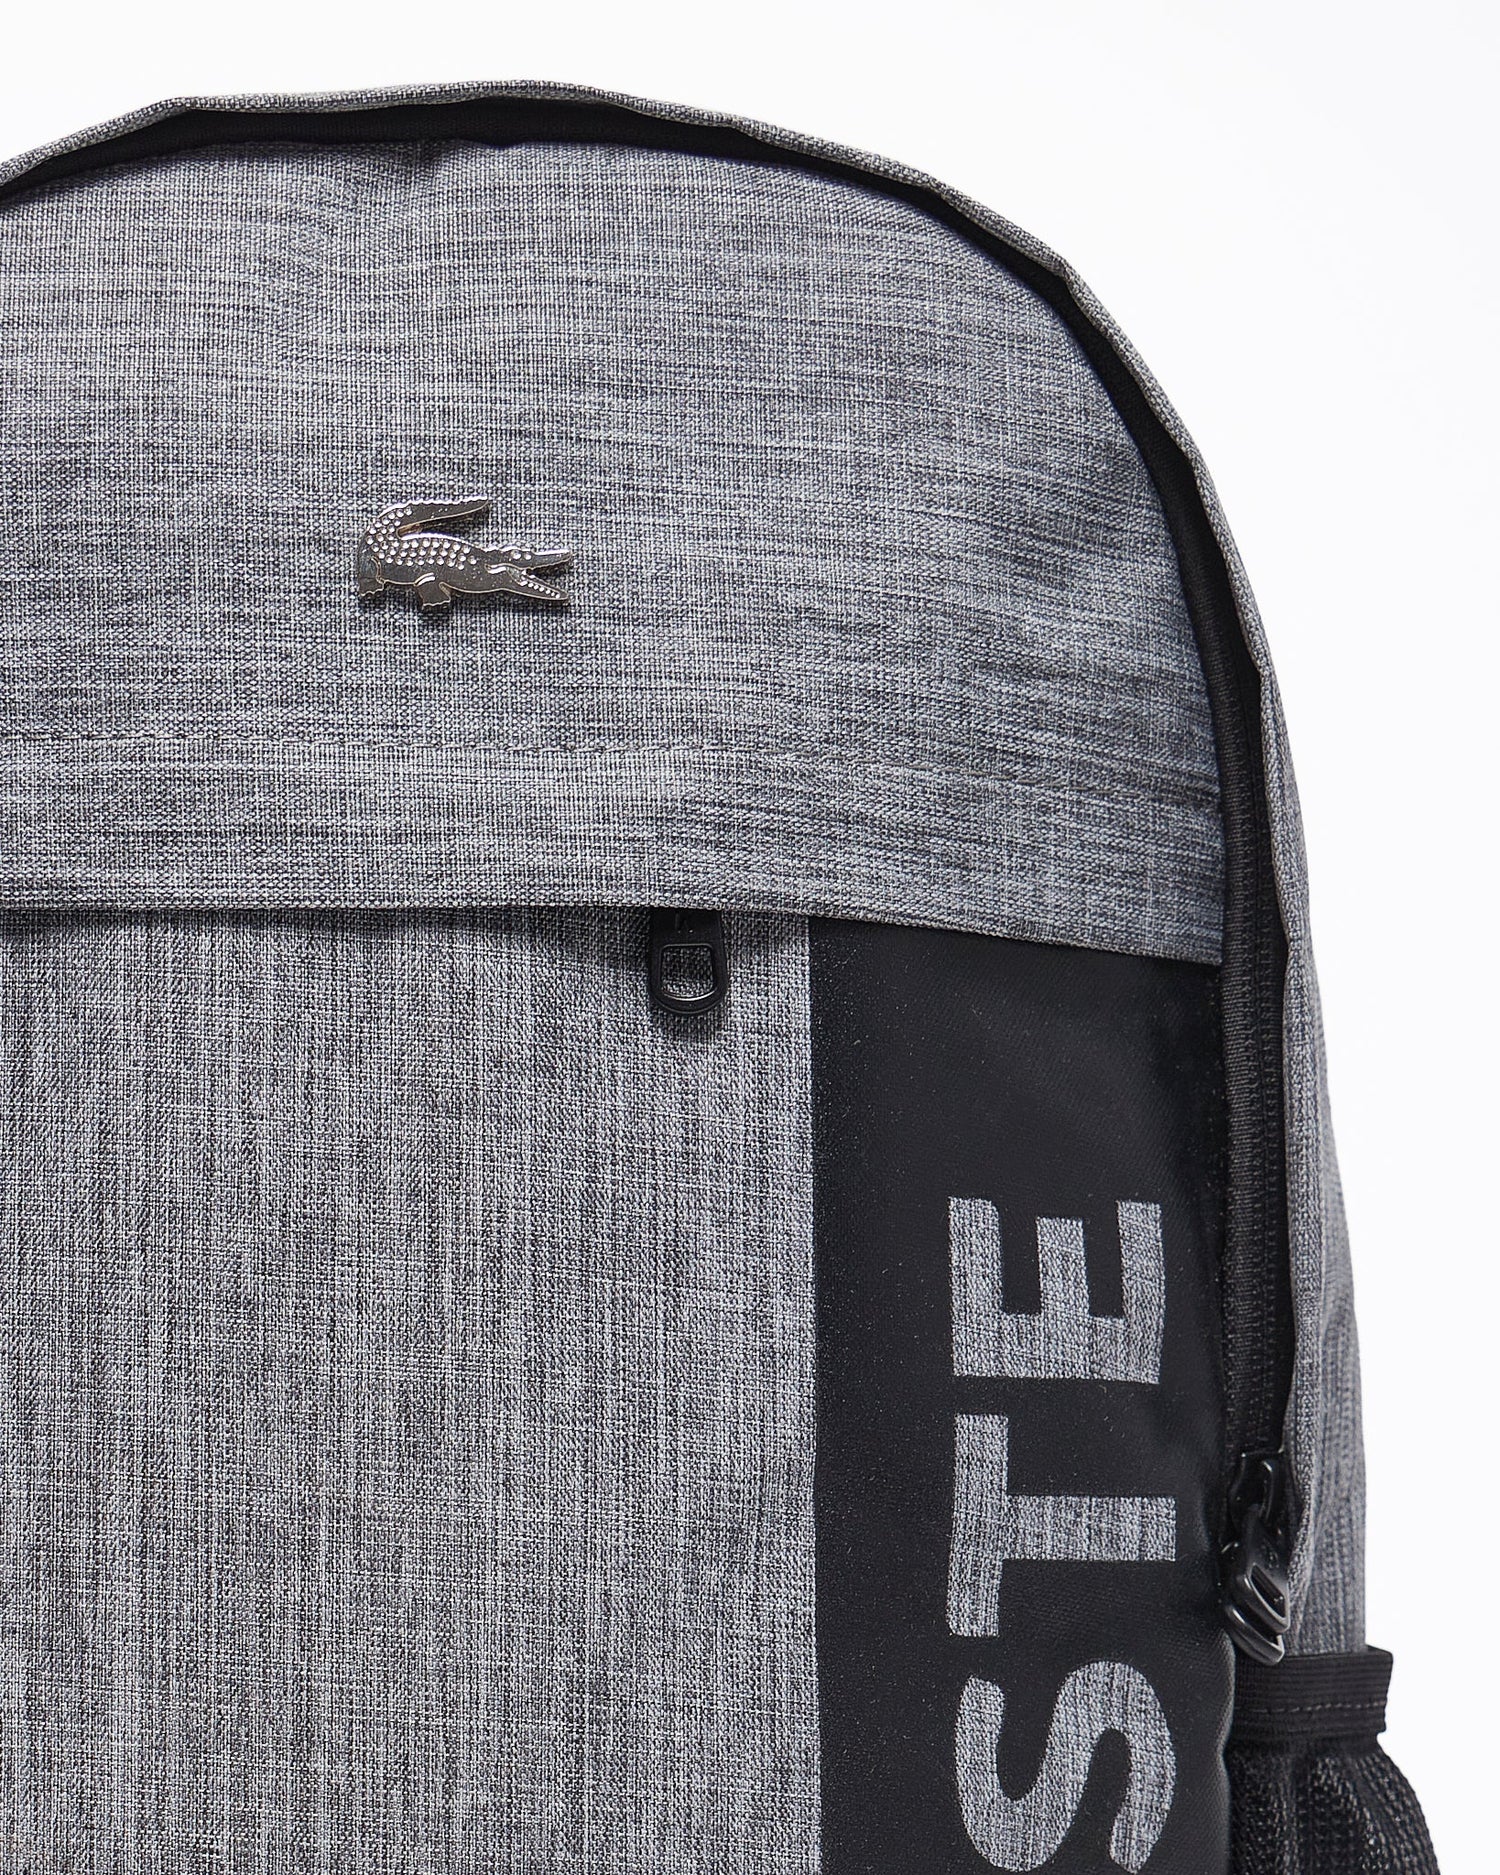 MOI OUTFIT-Logo Vertical Printed Backpack 22.90